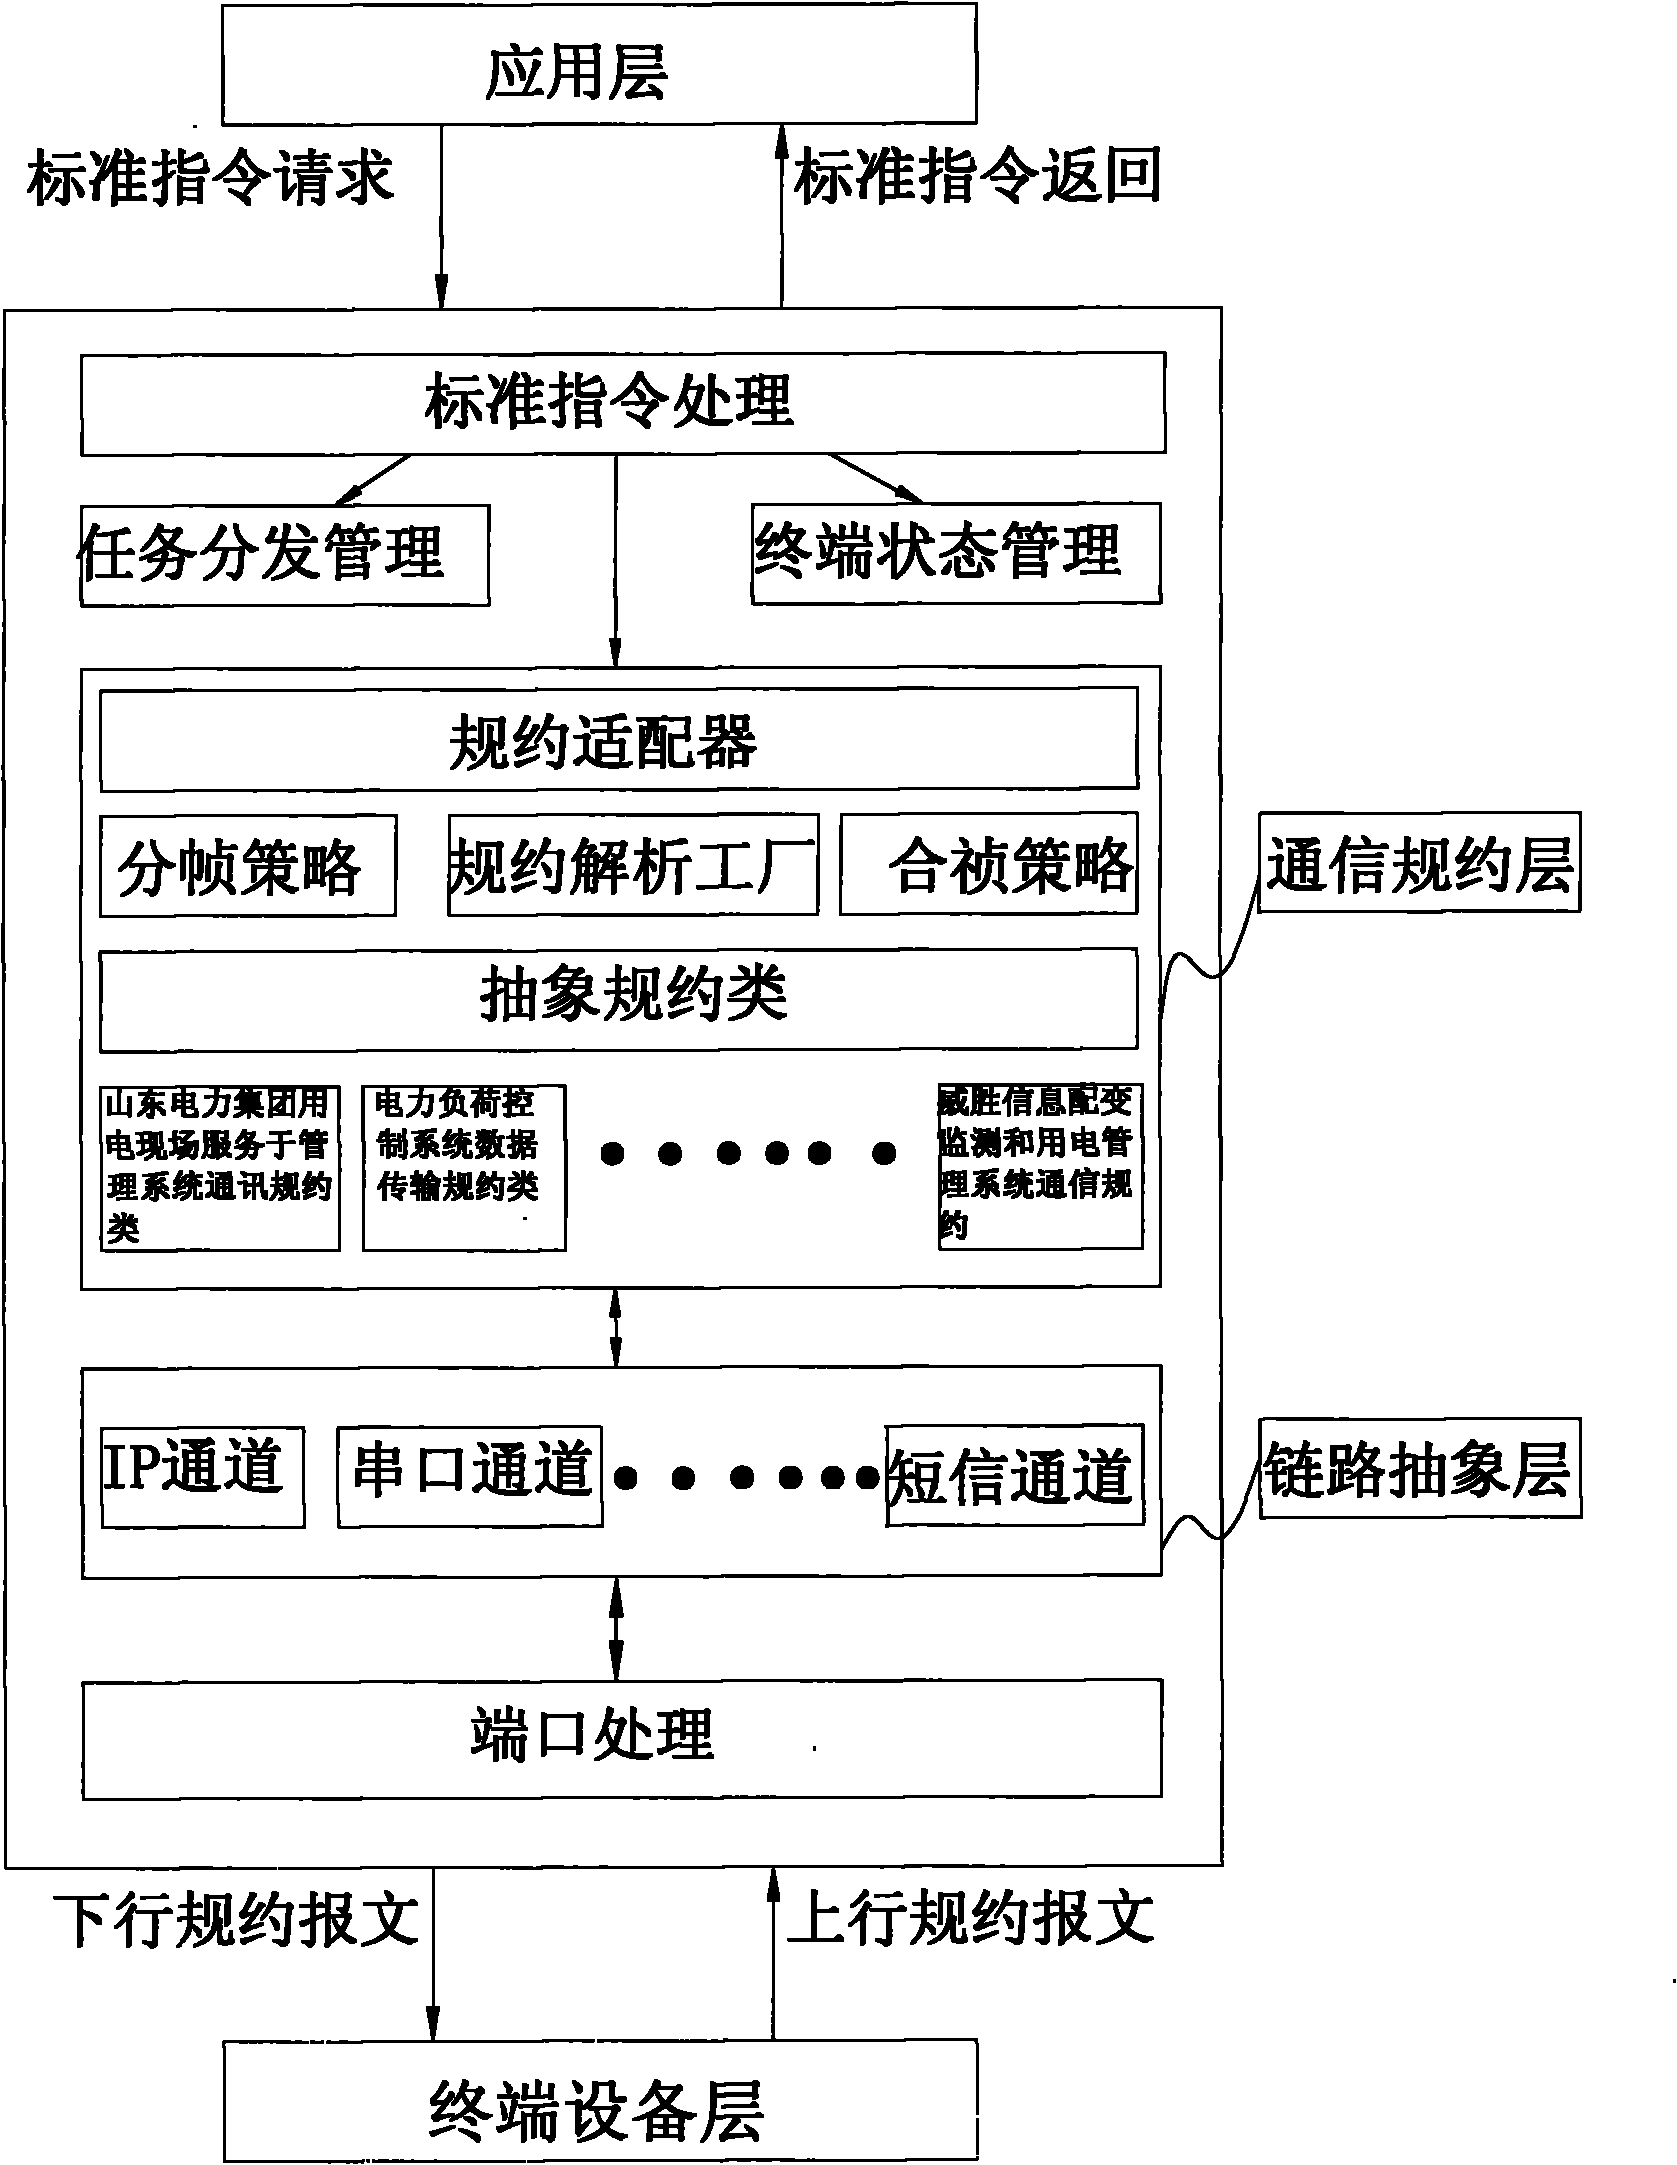 Communication protocol adapter-based integrated terminal access system structure